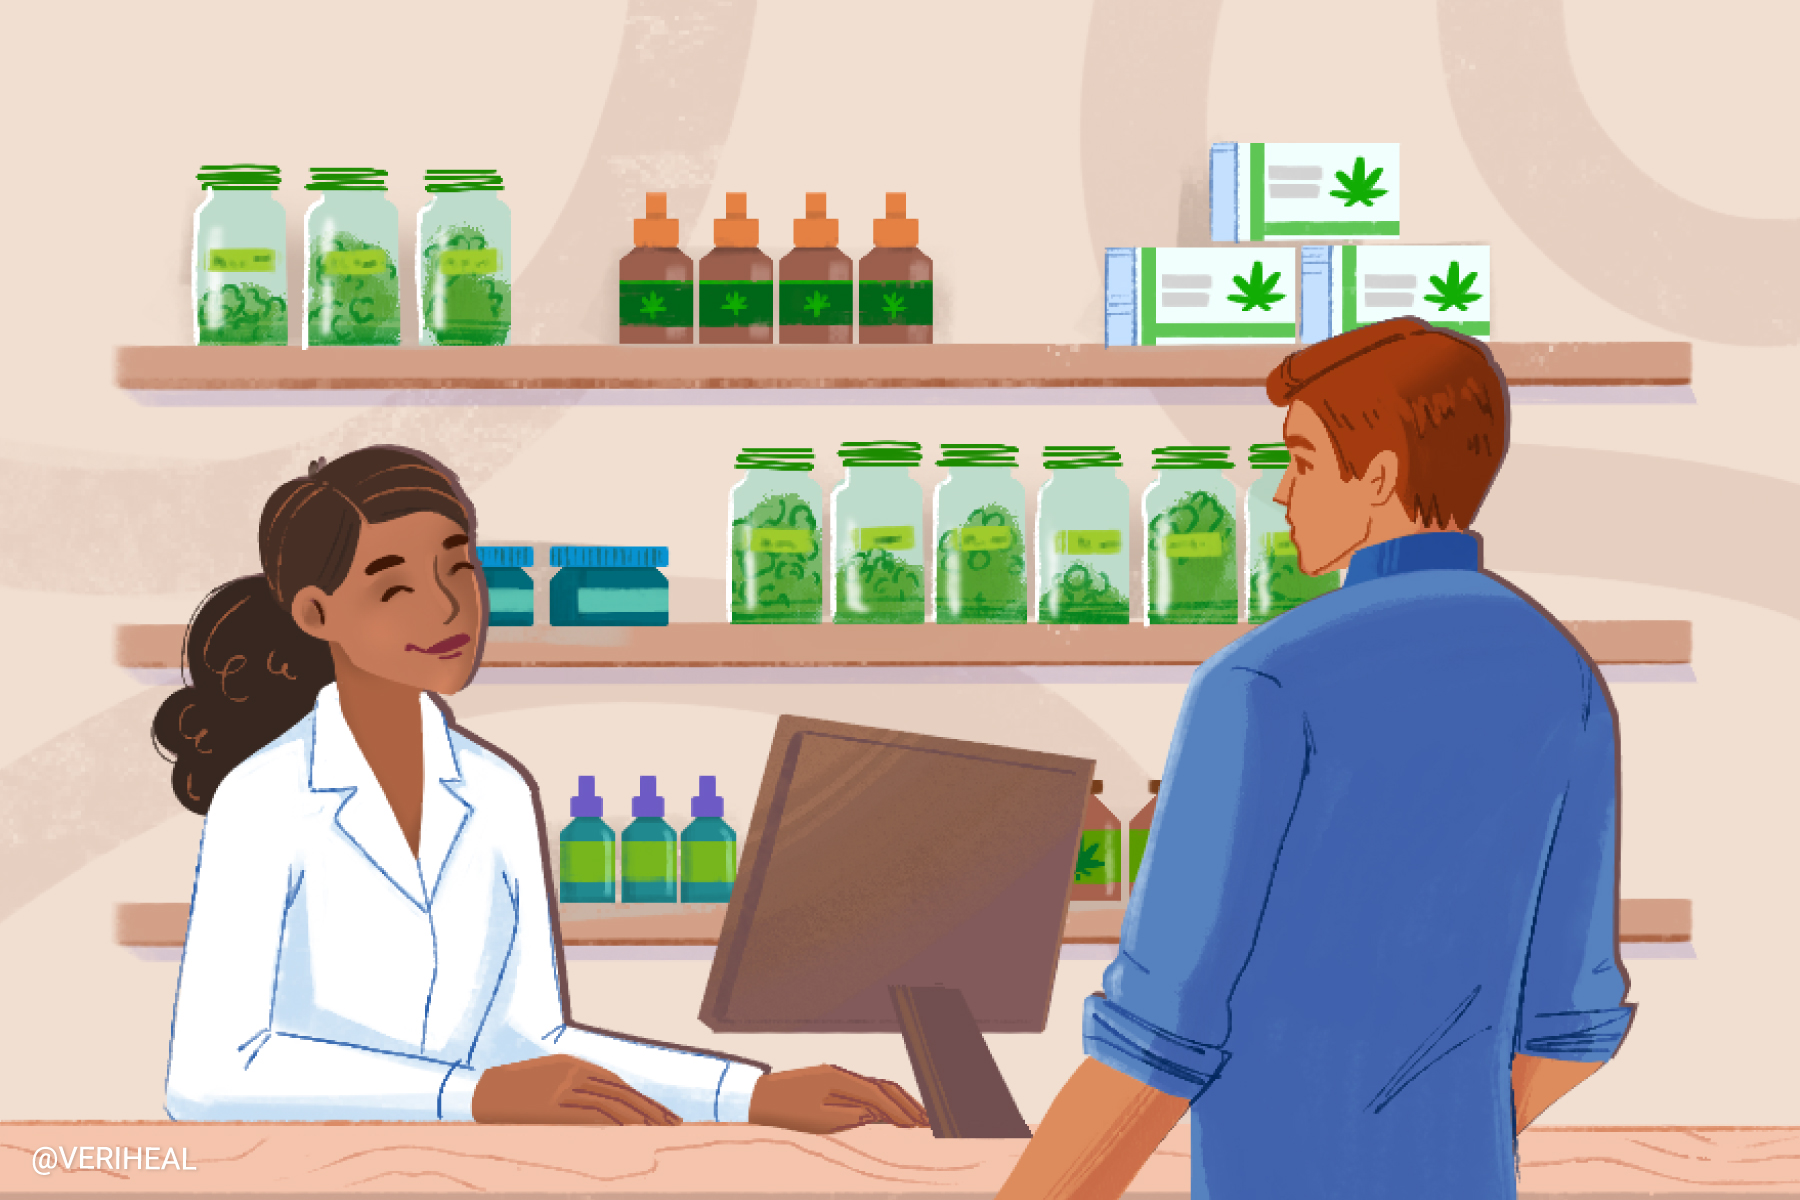 How Does Recreational Cannabis Legalization Impact the Future of Medical Cannabis?